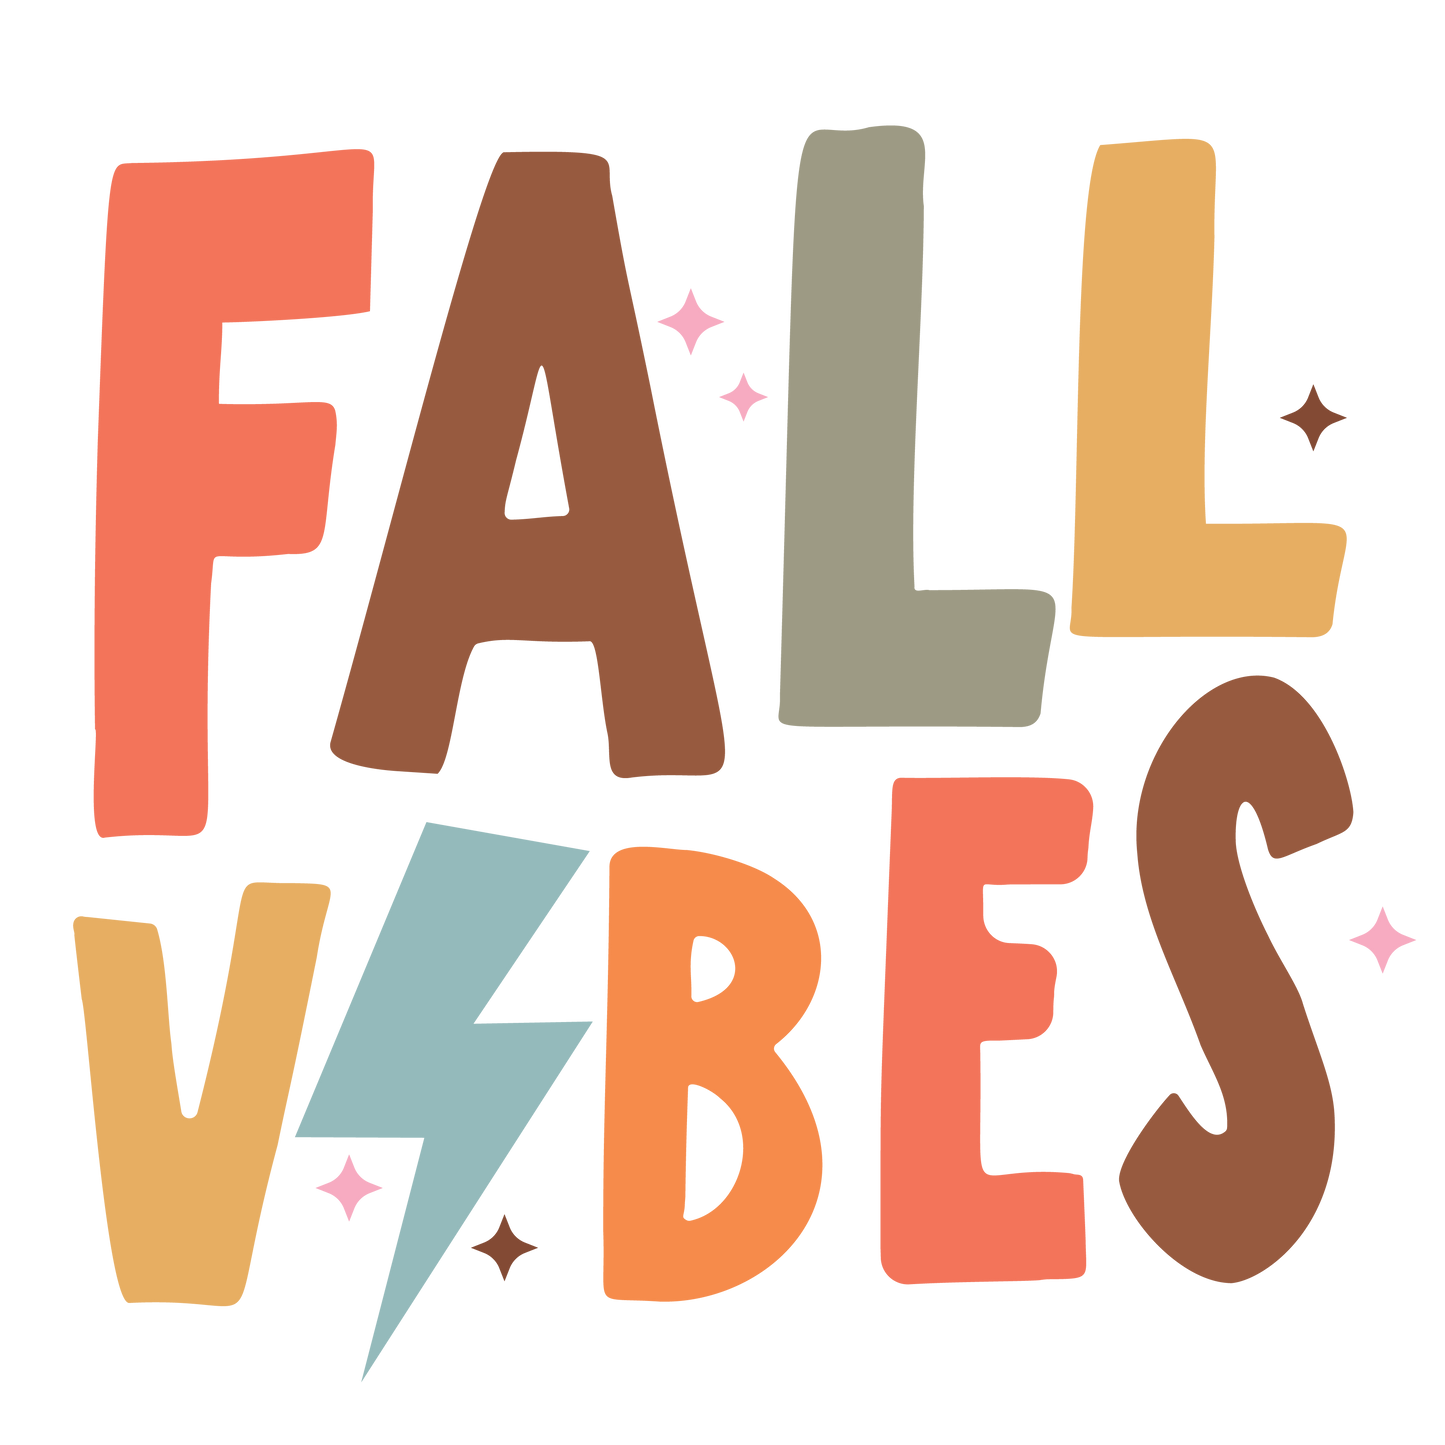 Fall Vibes 2